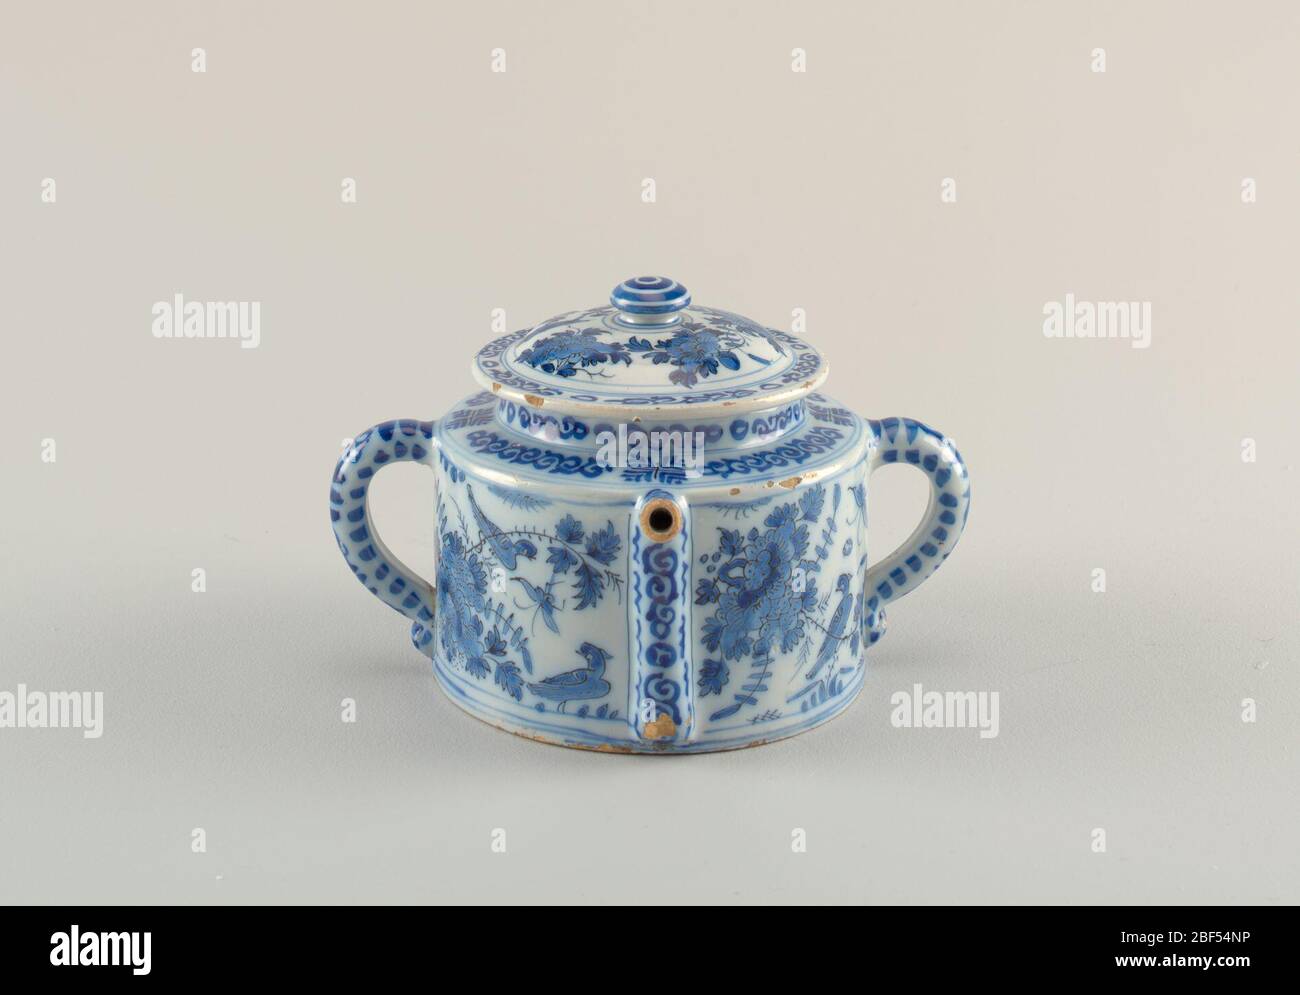 Posset Pot. Cylindrical body with straight sides; 2 loop handles opposite sides; spout rises along side body, projects horizontally from squared shoulder; domed lid with wide lip and flattened knop finial; painted in underglaze blue on white with chinoiserie birds, flower Stock Photo